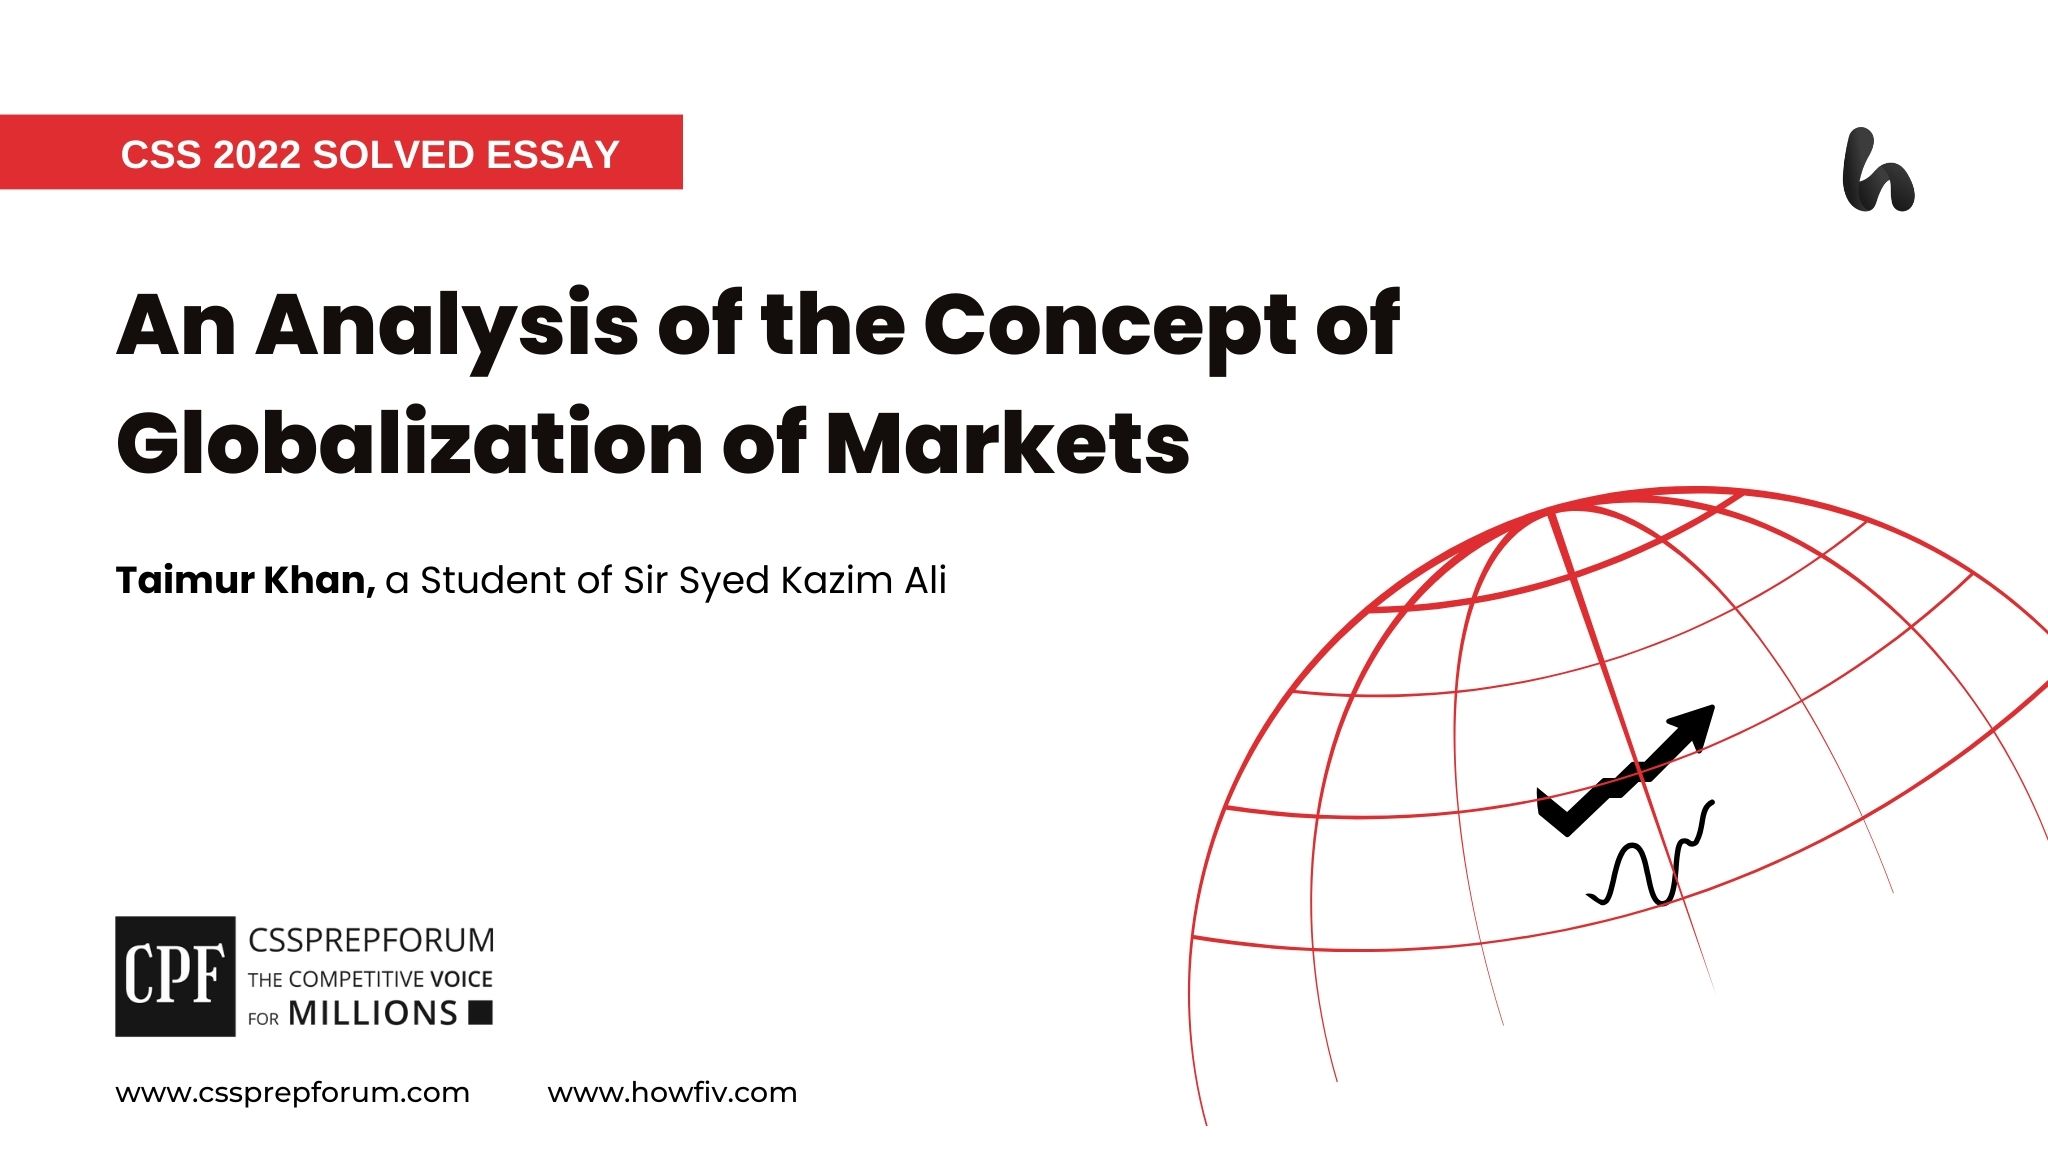 An analysis of the concept of globalization of markets